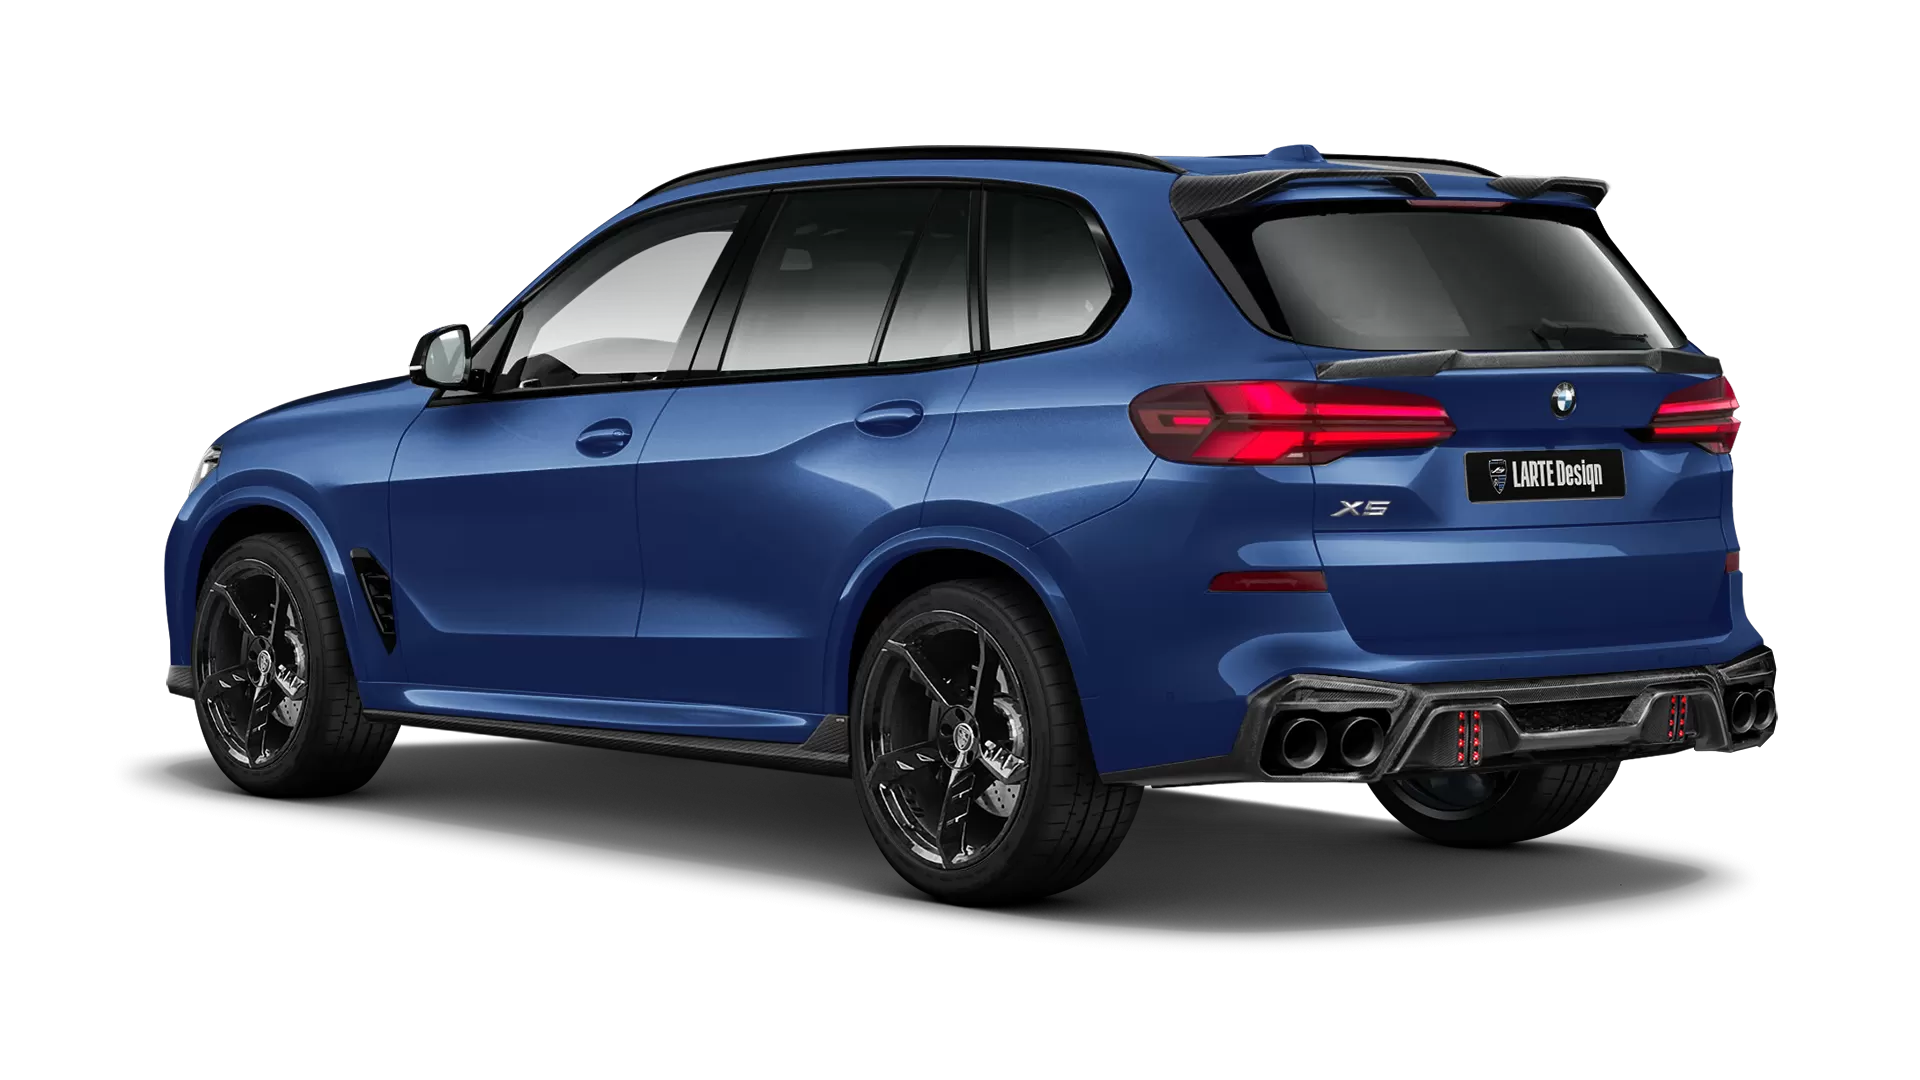 BMW X5 G05 LCI Facelift with carbon body kit: back view shown in Marina Bay Blue